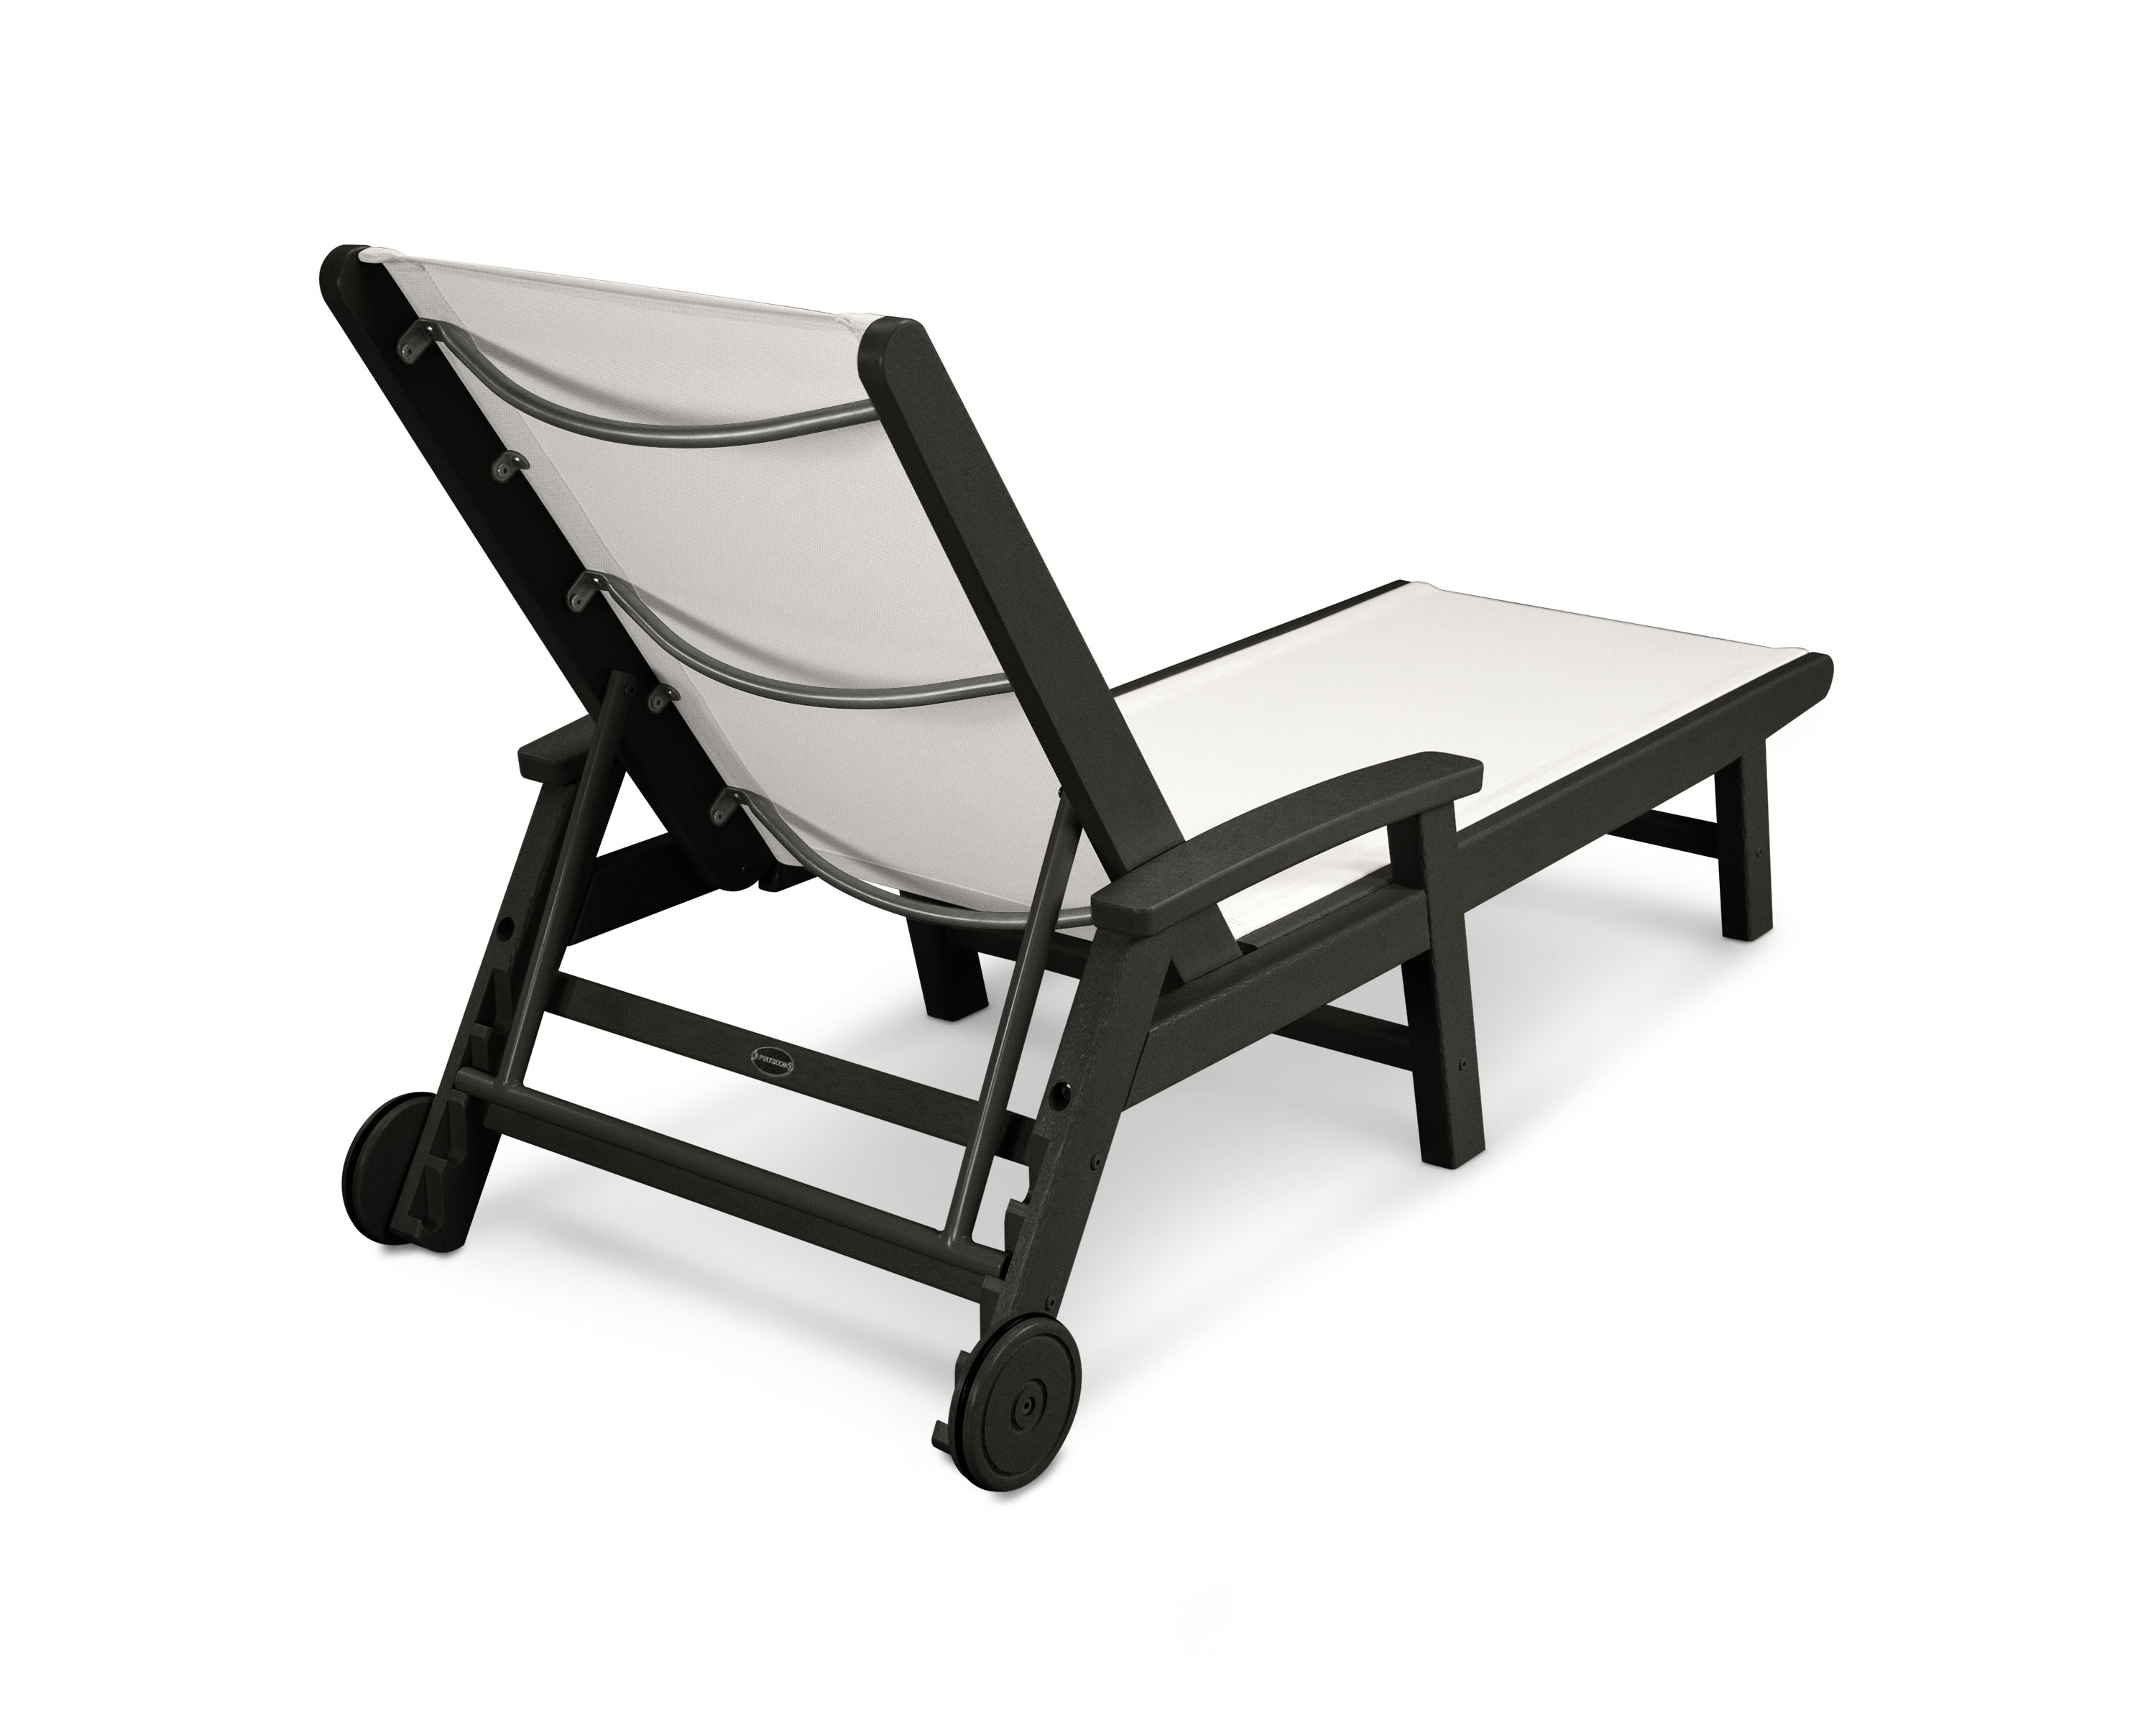 Lie Back And Relax In The Coastal Wheeled Chaise, Fitted With A Breathable Fabric Sling For Optimal Comfort. Conveniently Equipped With Wheels, You Can Easily Move Your All-weather Chaise To Wherever The Sun Takes You. Constructed Out Of Durable Polywood